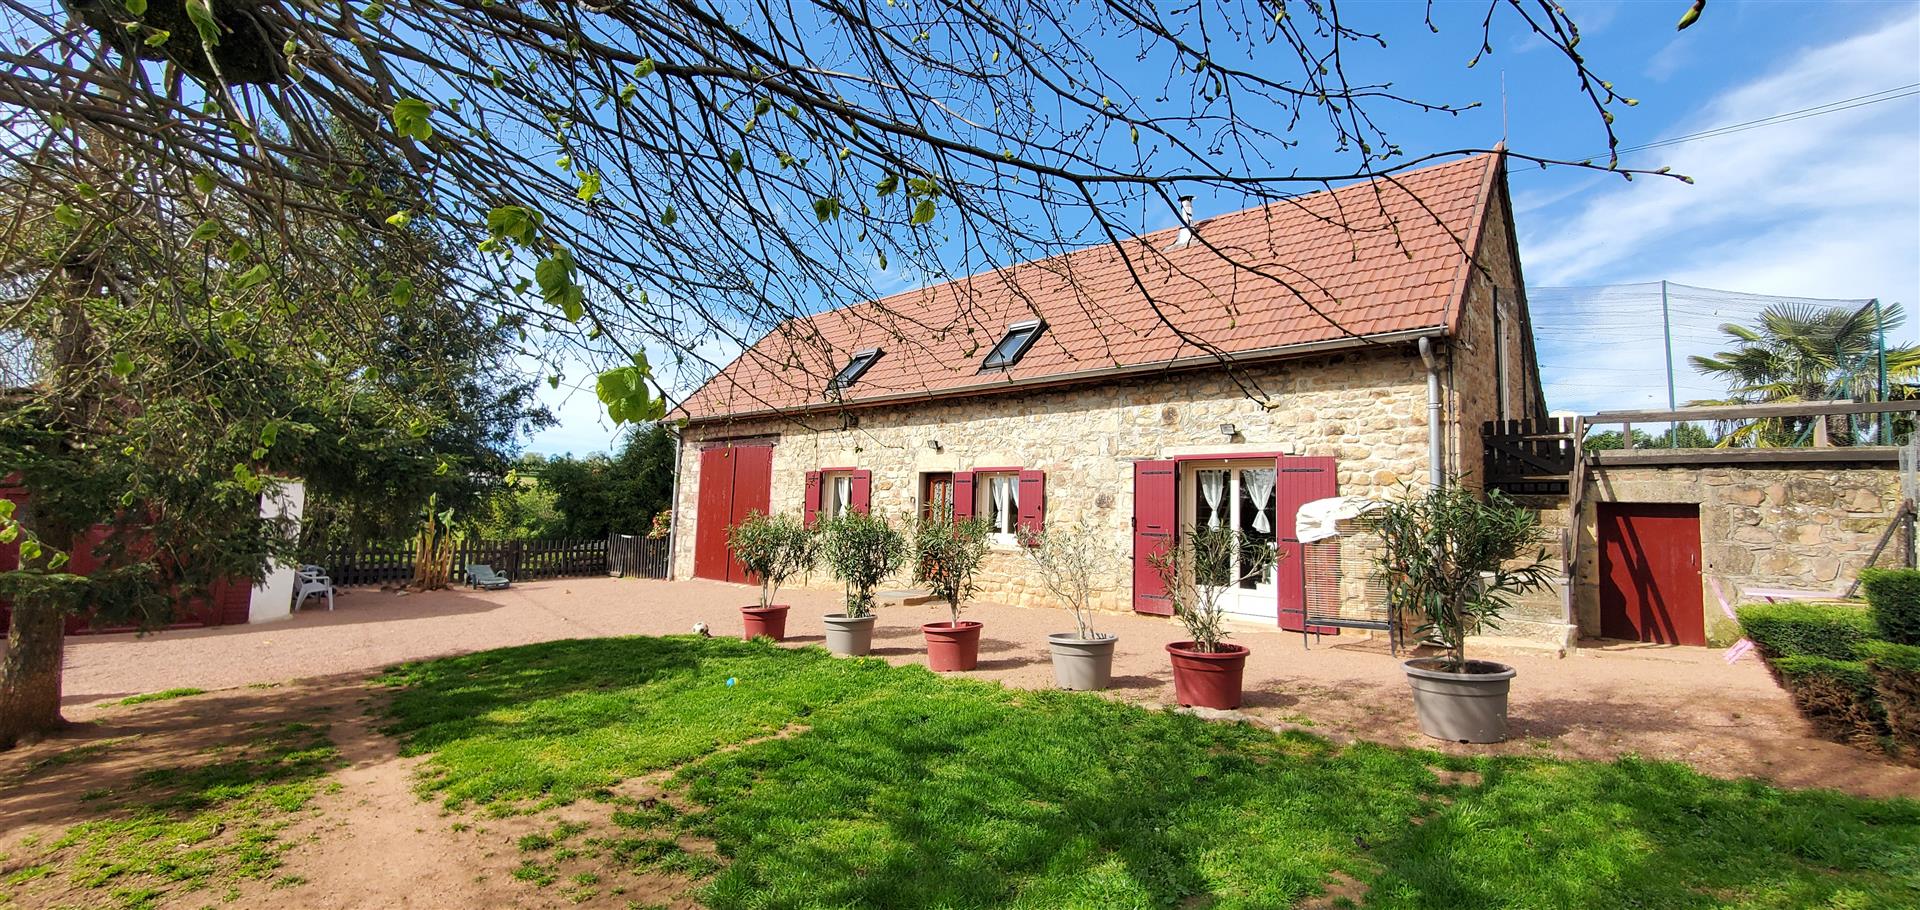 7 minutes from Charolles, a stone-built house with a pleasant garden